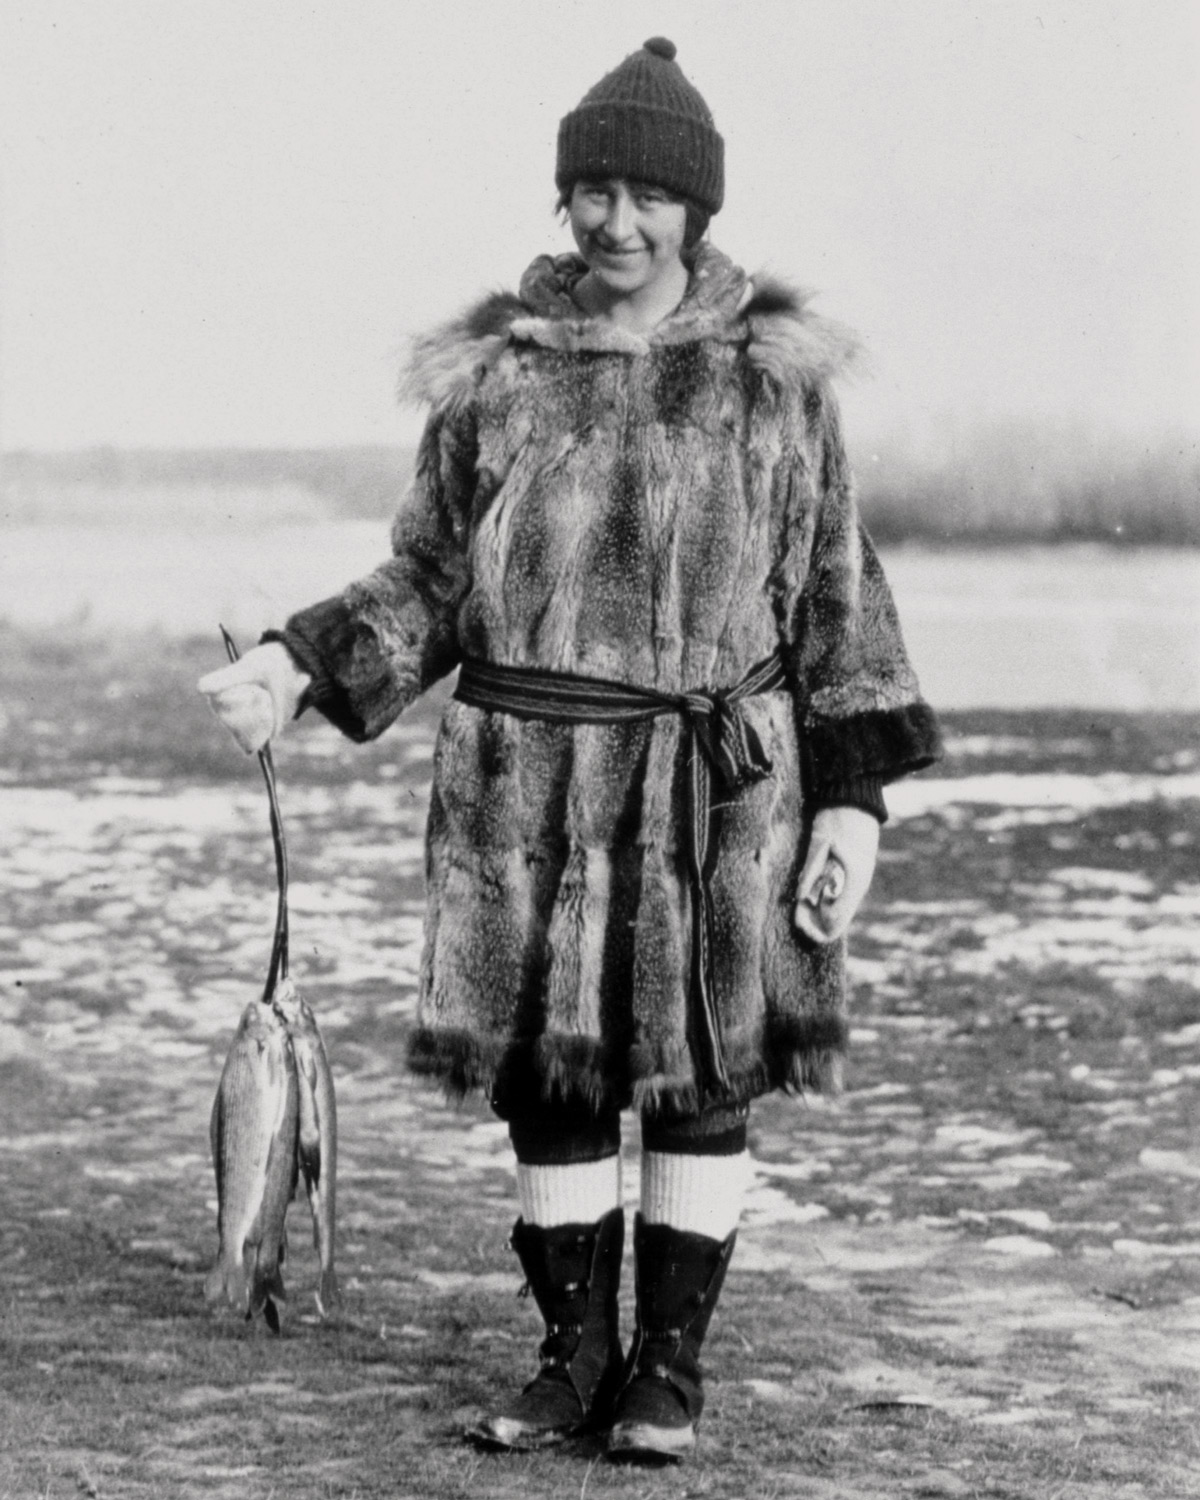 Mardy Murie in fur suit with snow and ice around with fish in hand